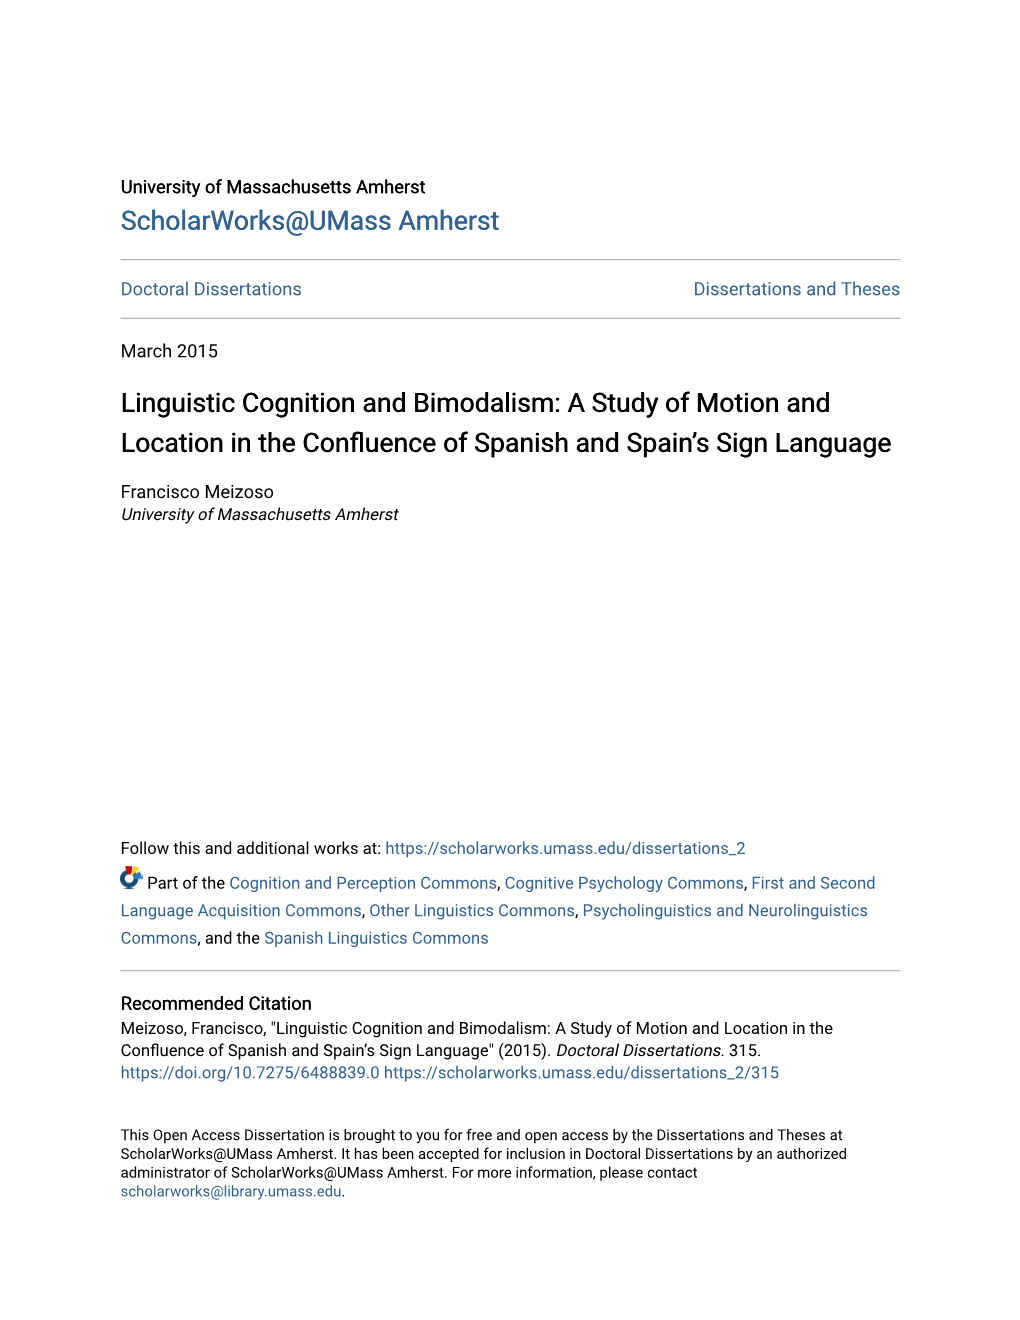 Linguistic Cognition and Bimodalism: a Study of Motion and Location in the Confluence of Spanish and Spain’S Sign Language